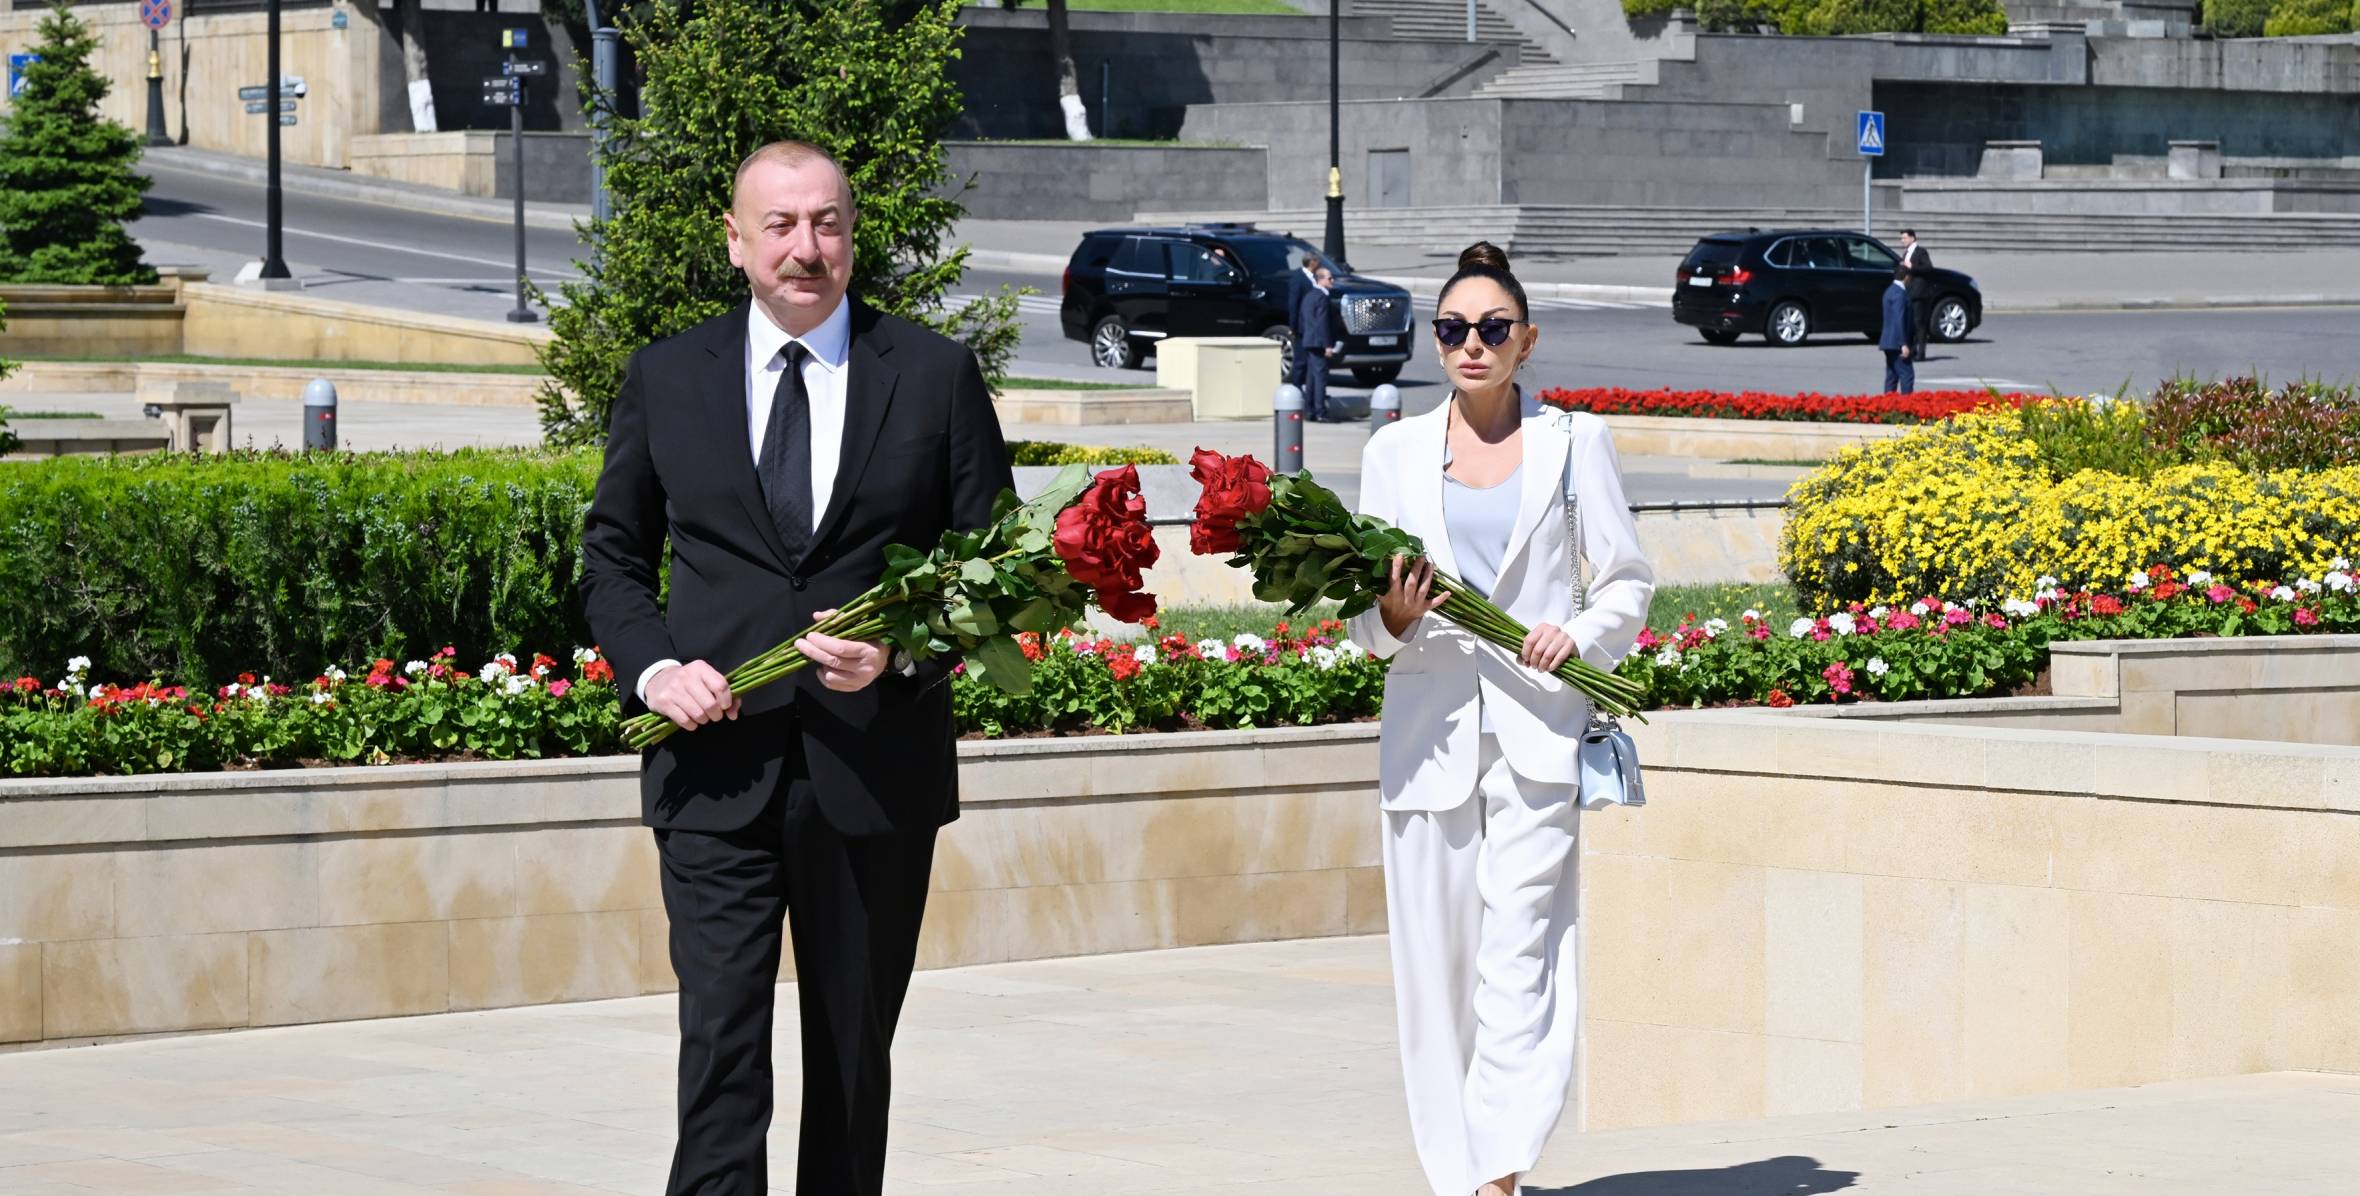 Ilham Aliyev and First Lady Mehriban Aliyeva paid tribute to Azerbaijanis who died for Victory over fascism